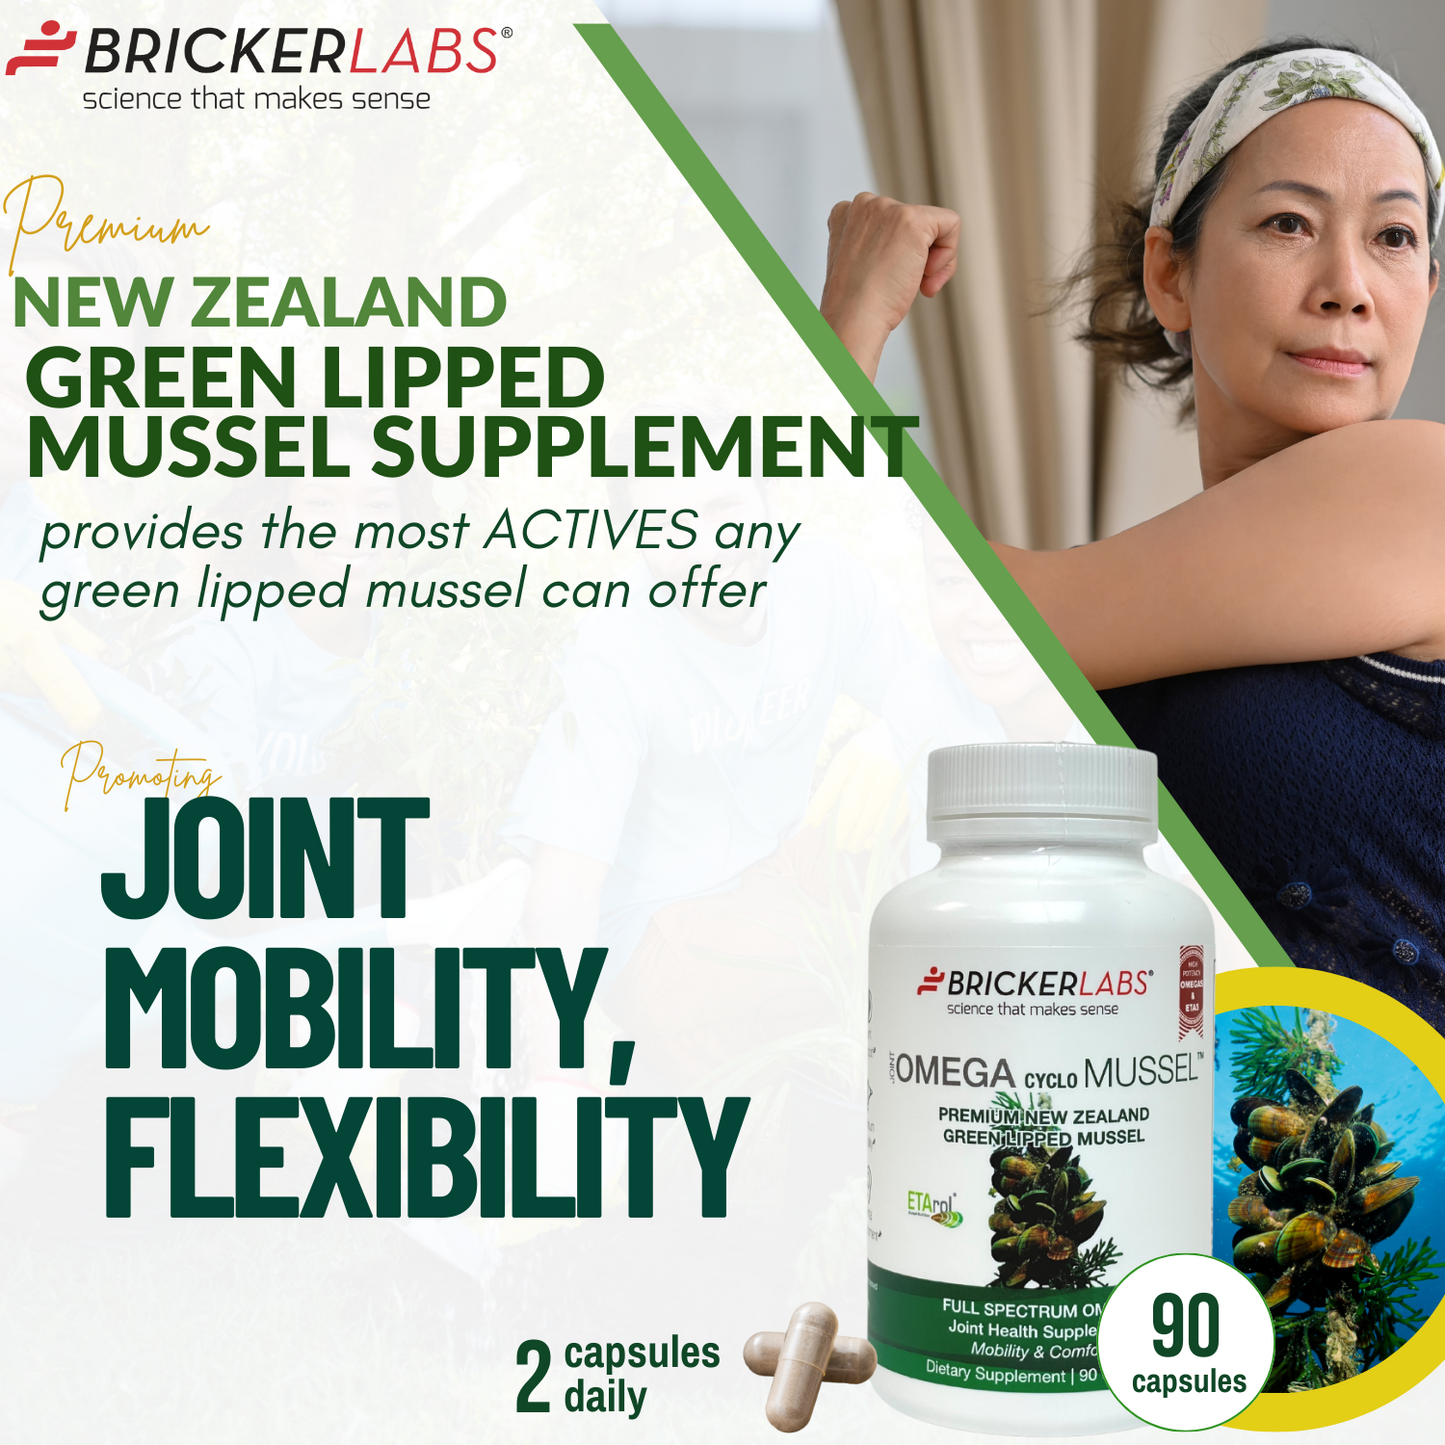 Omega Cyclo - Mussel │Premium New Zealand Green Lipped Mussel Joint Health Supplement